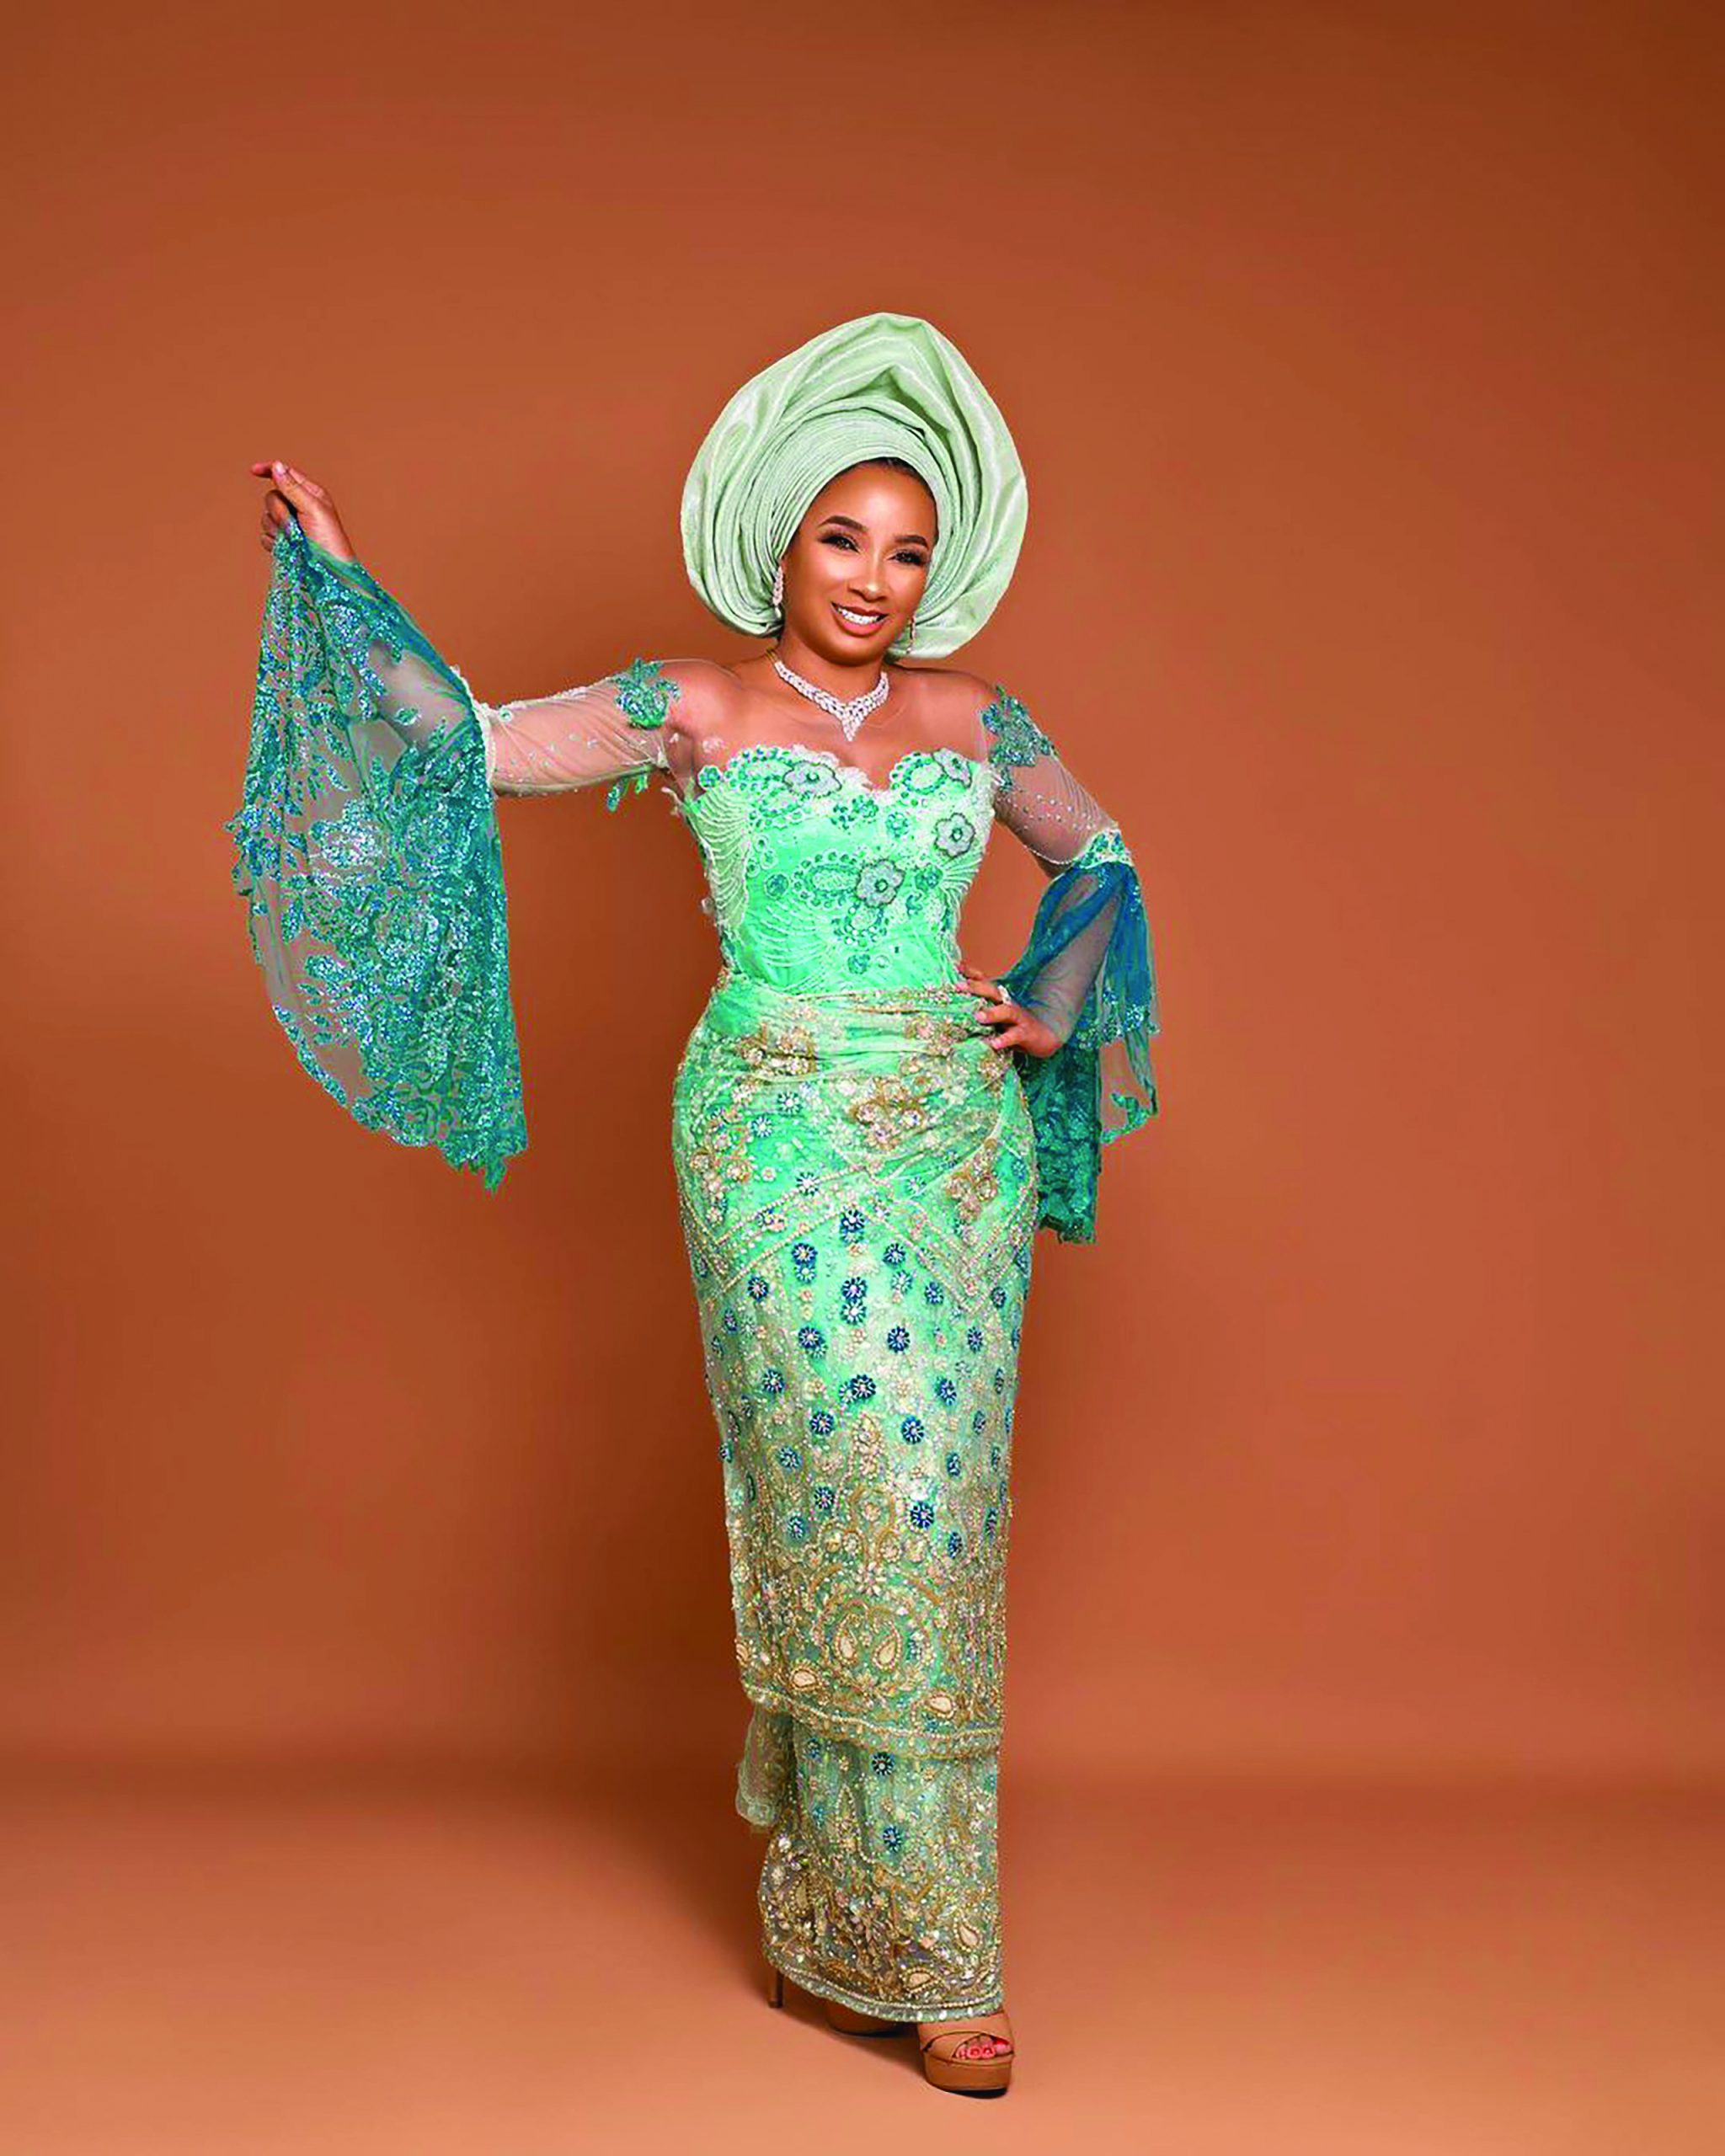 FORMER BEAUTY QUEEN IBINABO FIBERESIMA SPEAKS: “WHAT LIFE HAS TAUGHT ME AT 50”